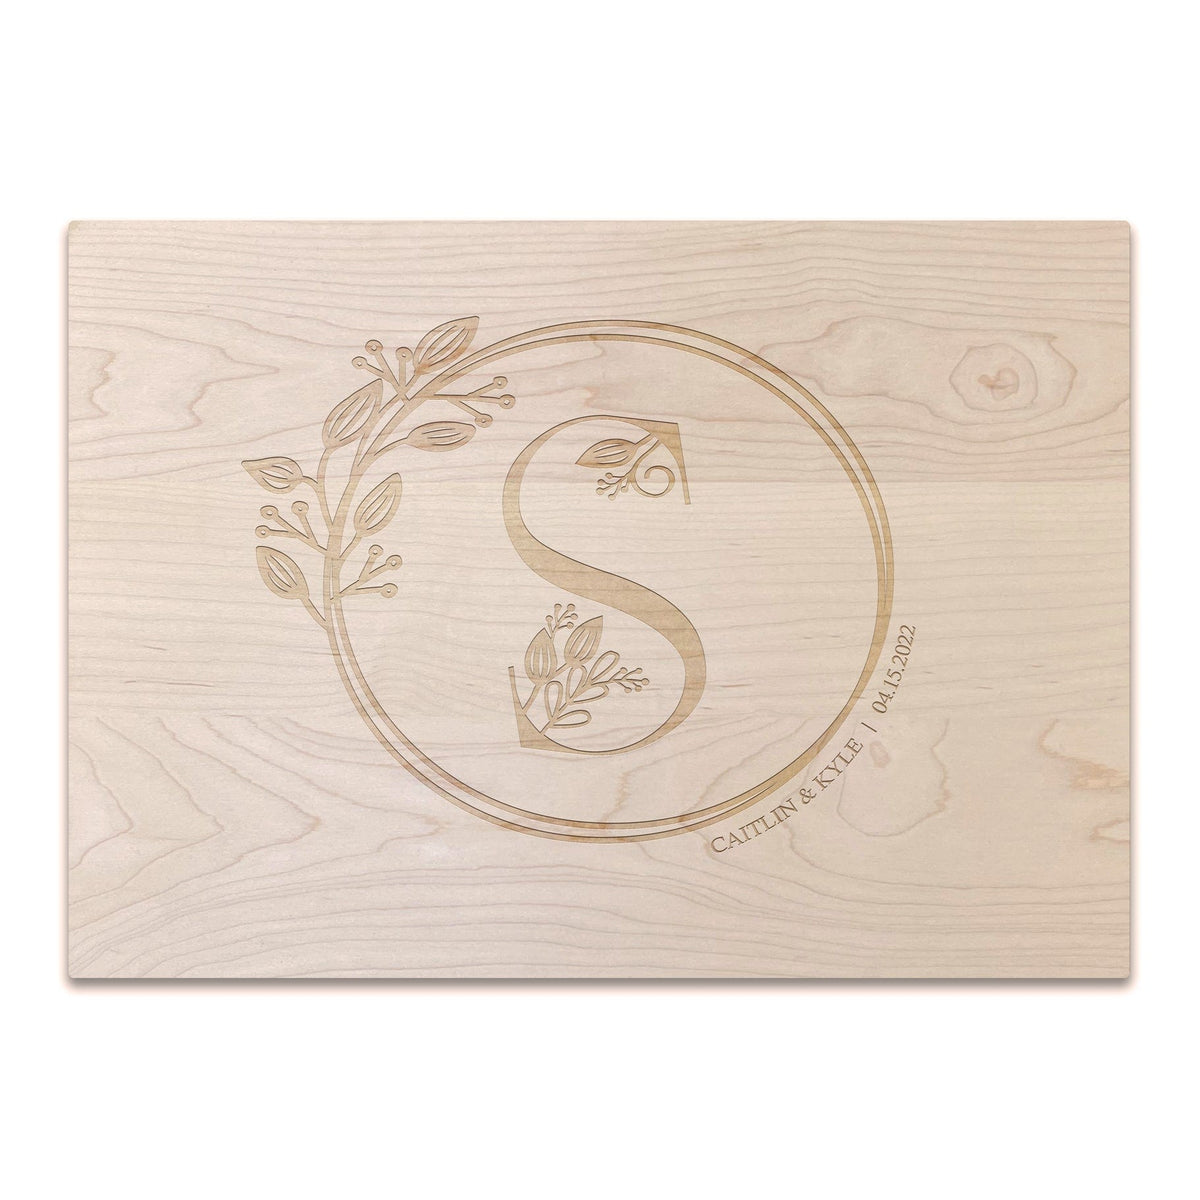 Monogram personalized cutting board from Personal Prints